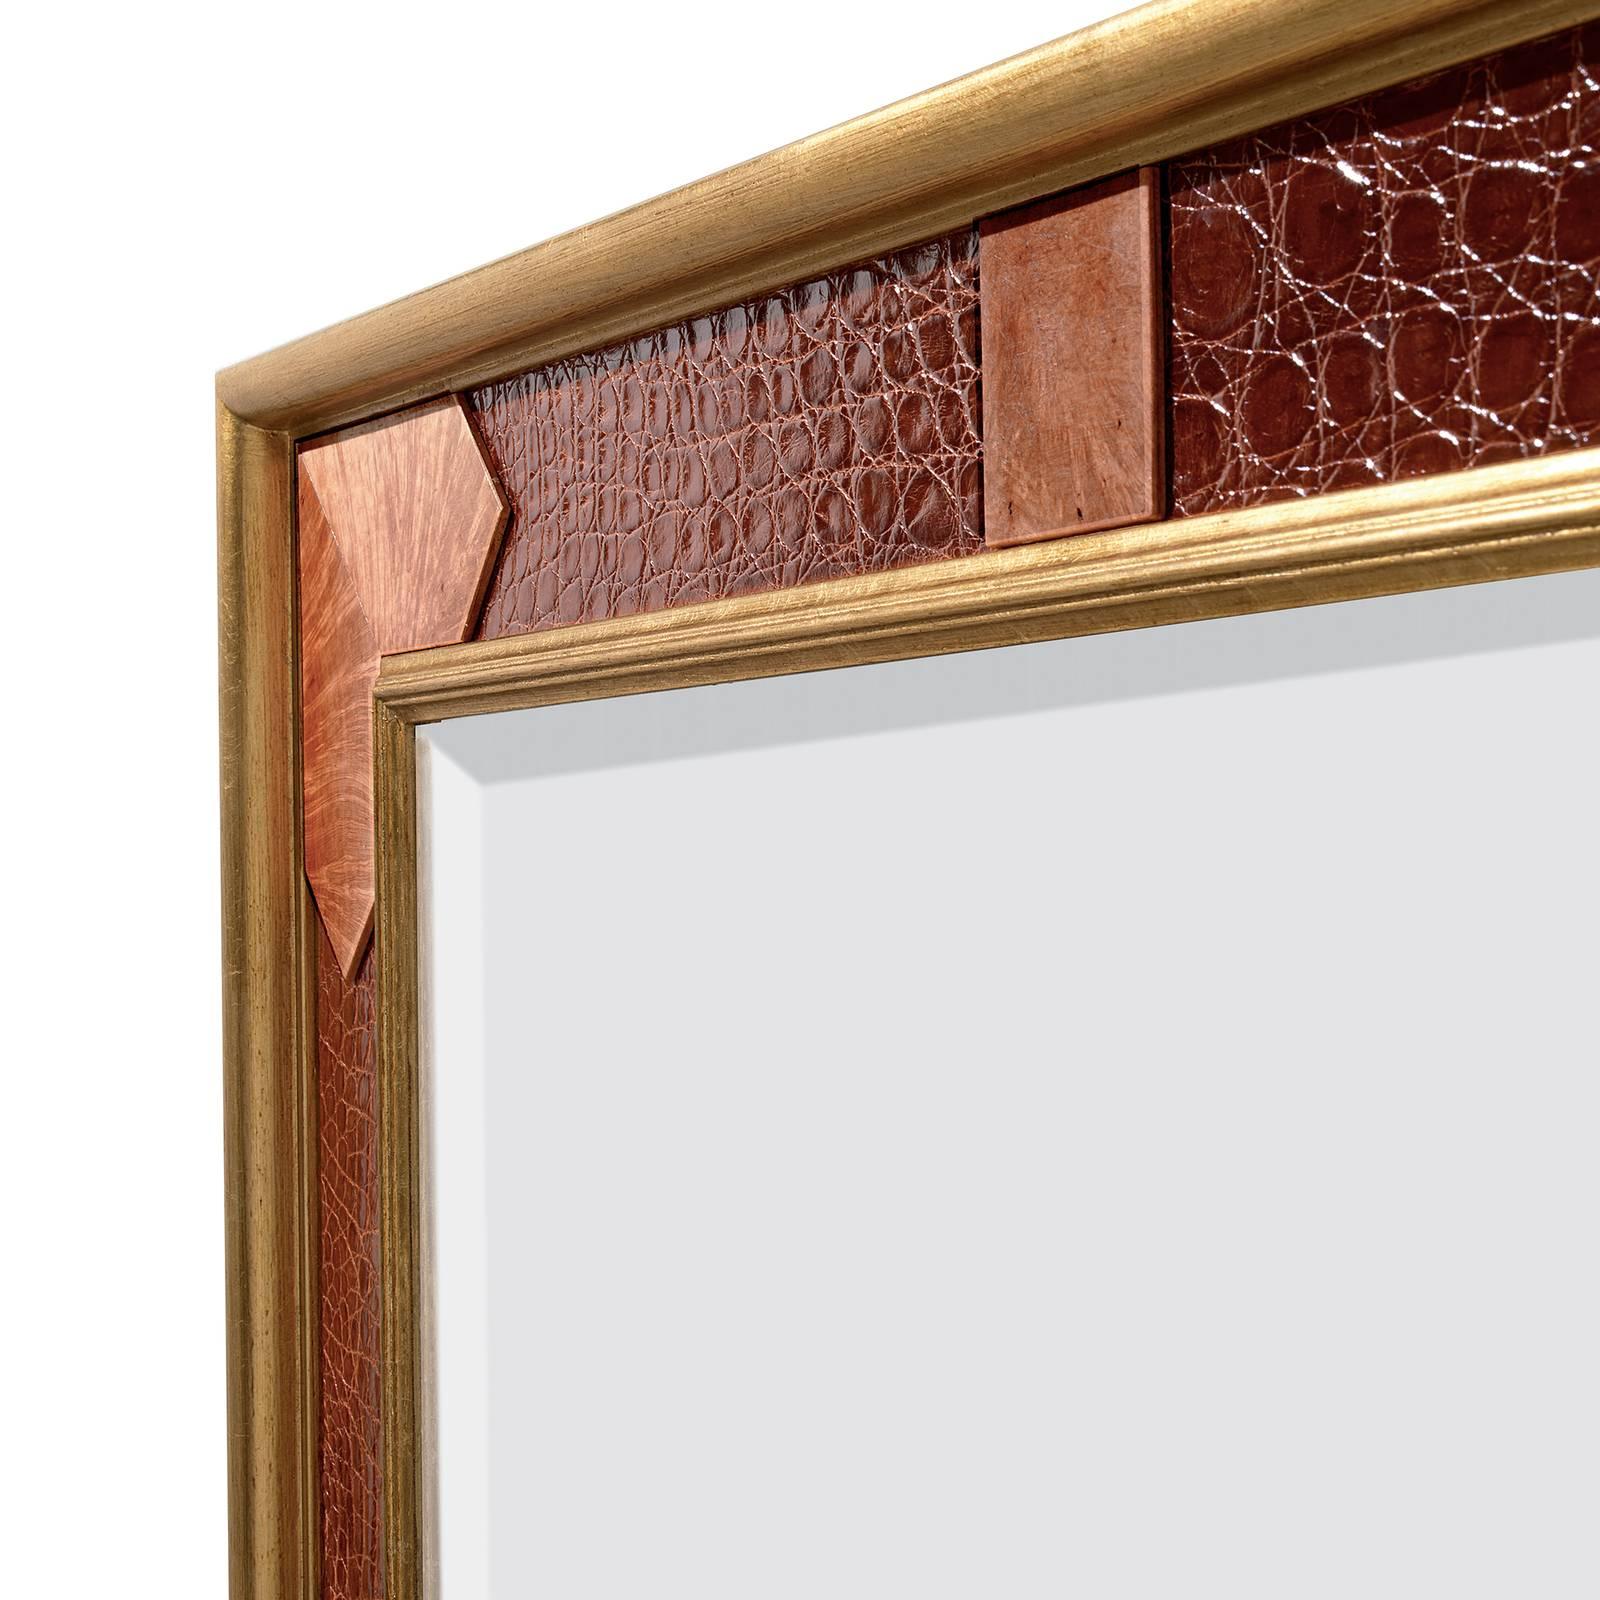 Stunning and sumptuous, this mirror will make a sophisticated statement in both a classic and a contemporary decor, thanks to its exquisite craftsmanship and the use of high-quality materials. The back in mahogany support the mirror with moldings at